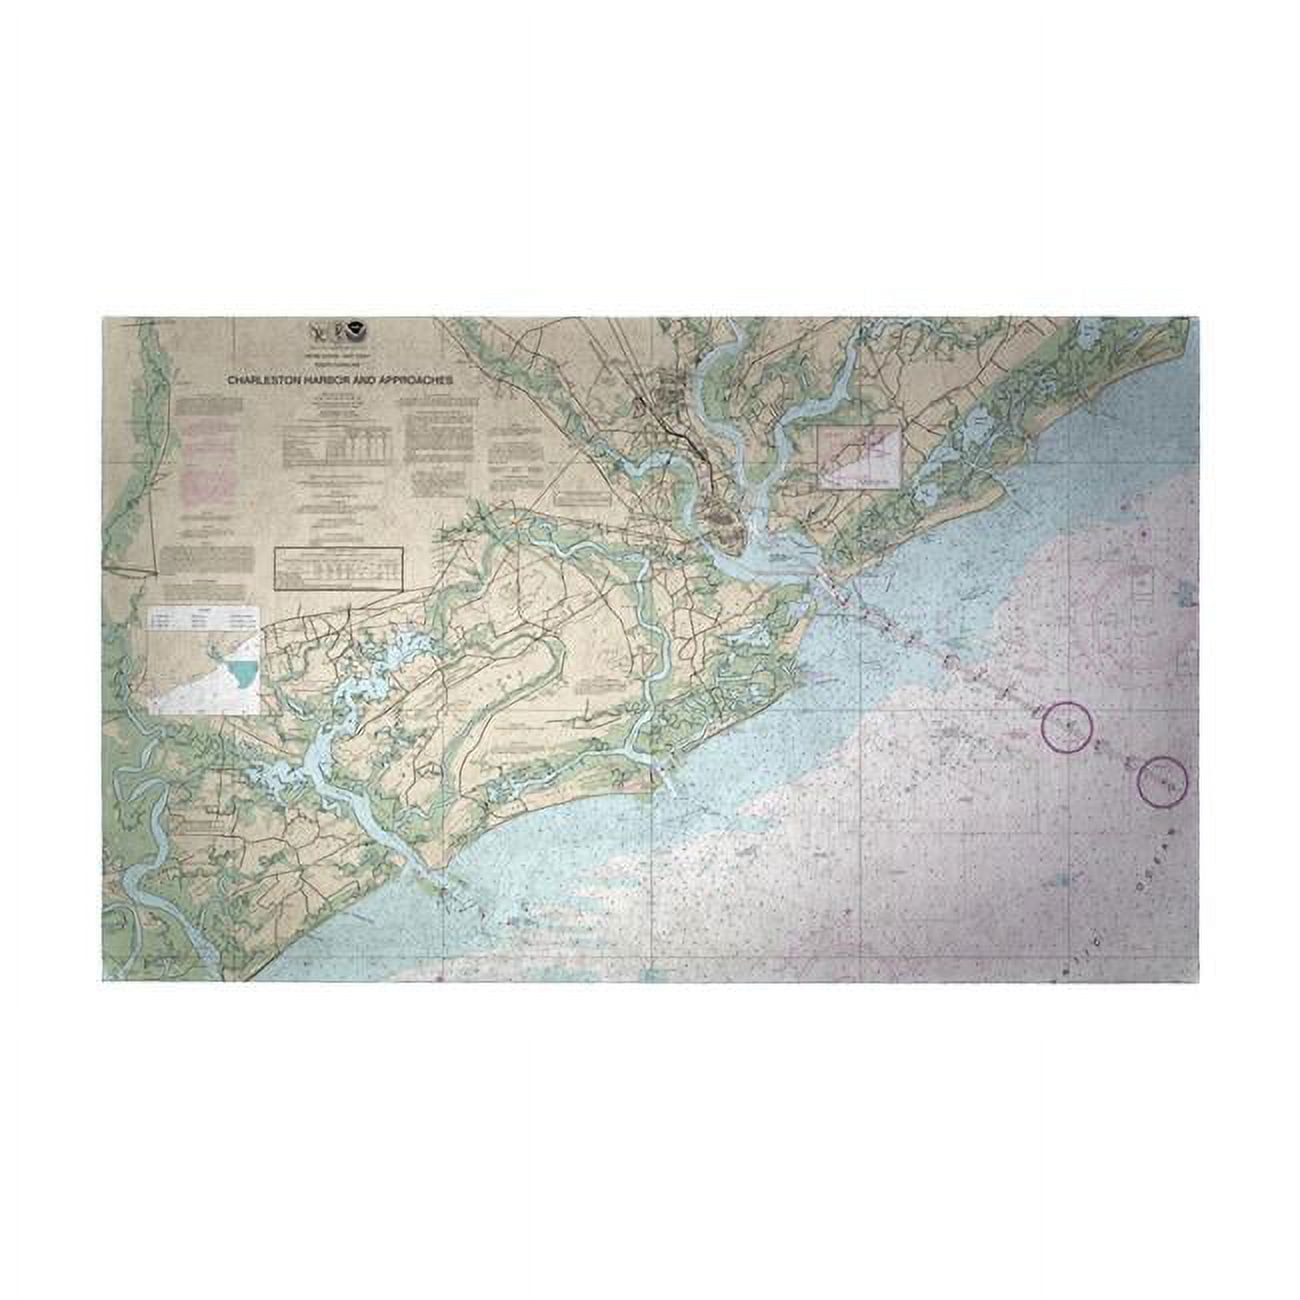 Dm11521g 30 X 50 In. Charleston Harbor & Approaches, Sc Nautical Map Large Door Mat